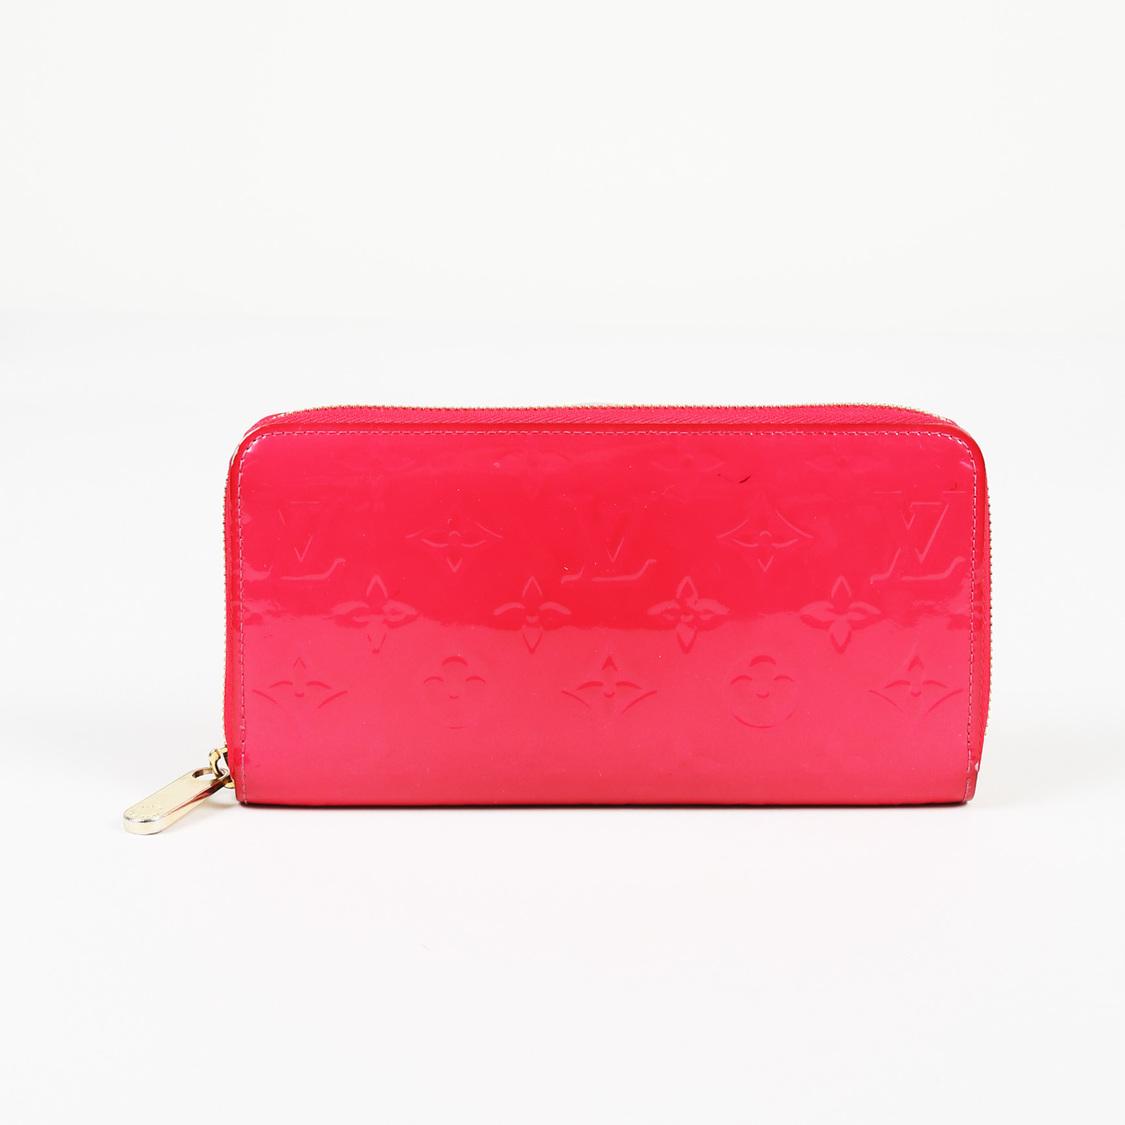 Louis Vuitton Pink Monogram Vernis Leather Zippy Wallet in Pink - Save 5% - Lyst